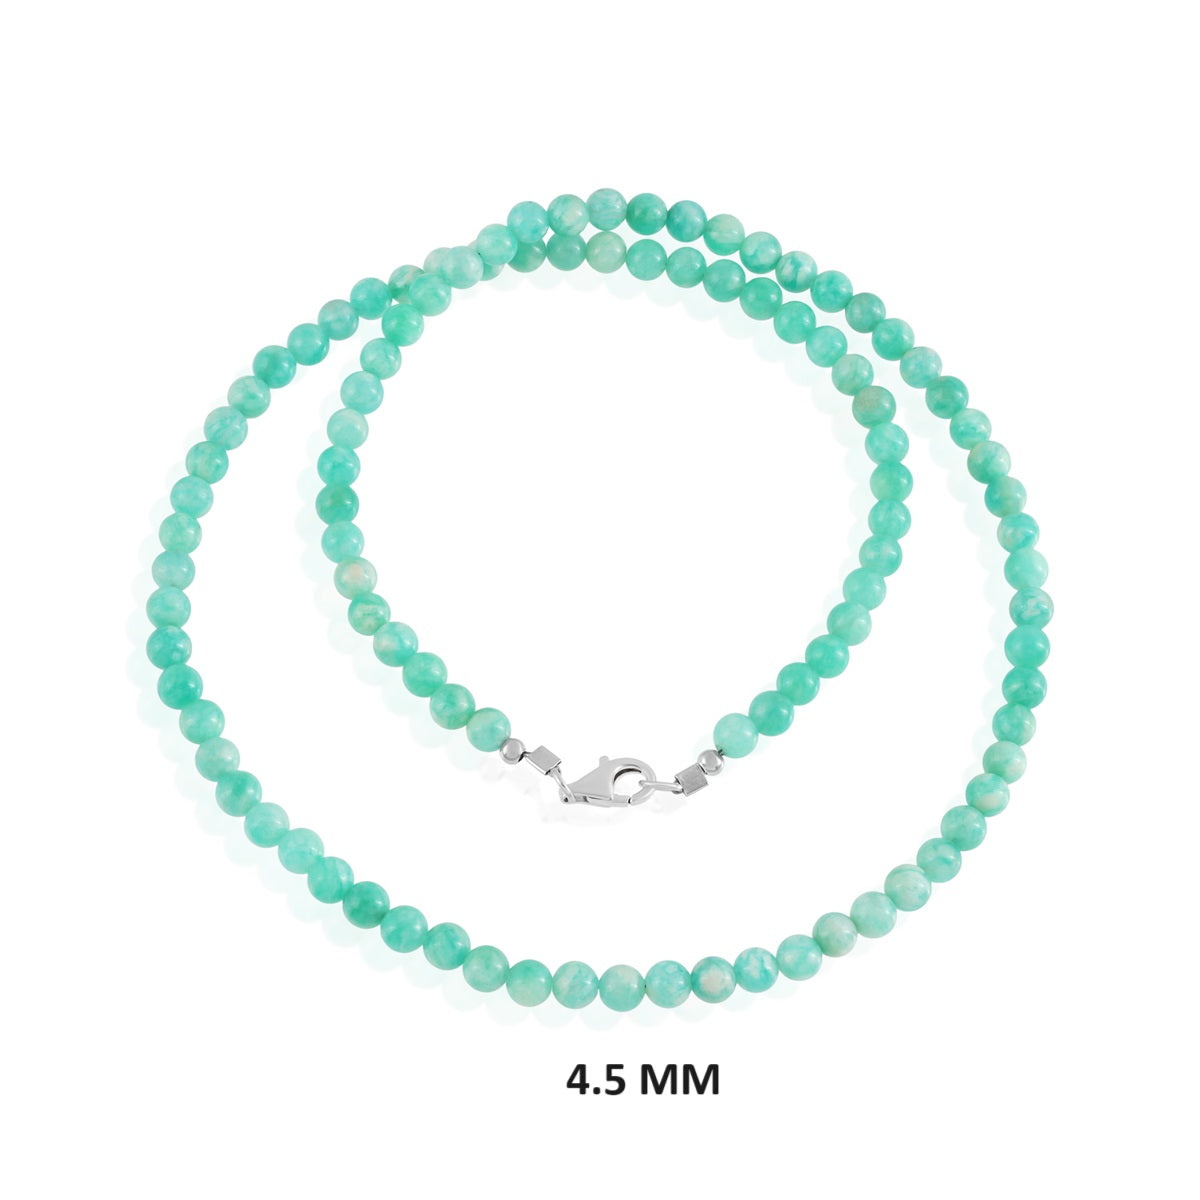 Amazonite Beads Silver Necklace: Elegance and Empowerment